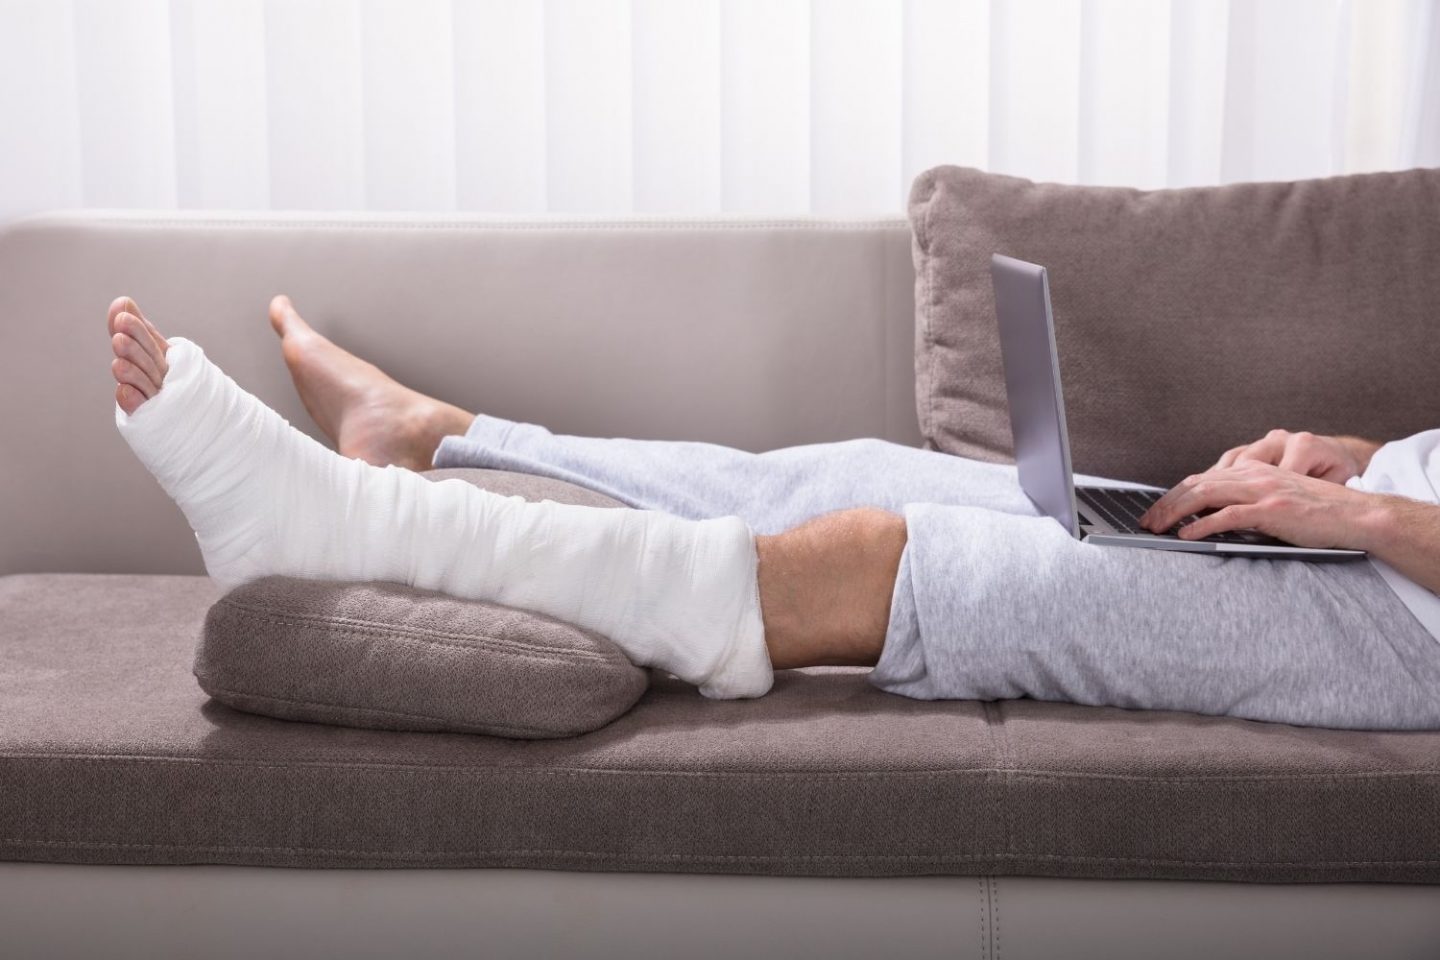 A photo of a man's legs as he lies on a sofa with a laptop on his thighs. One leg is propped up in a bandage as though he's broken his ankle. This is for the health news story of a new biomaterial for bone breaks.